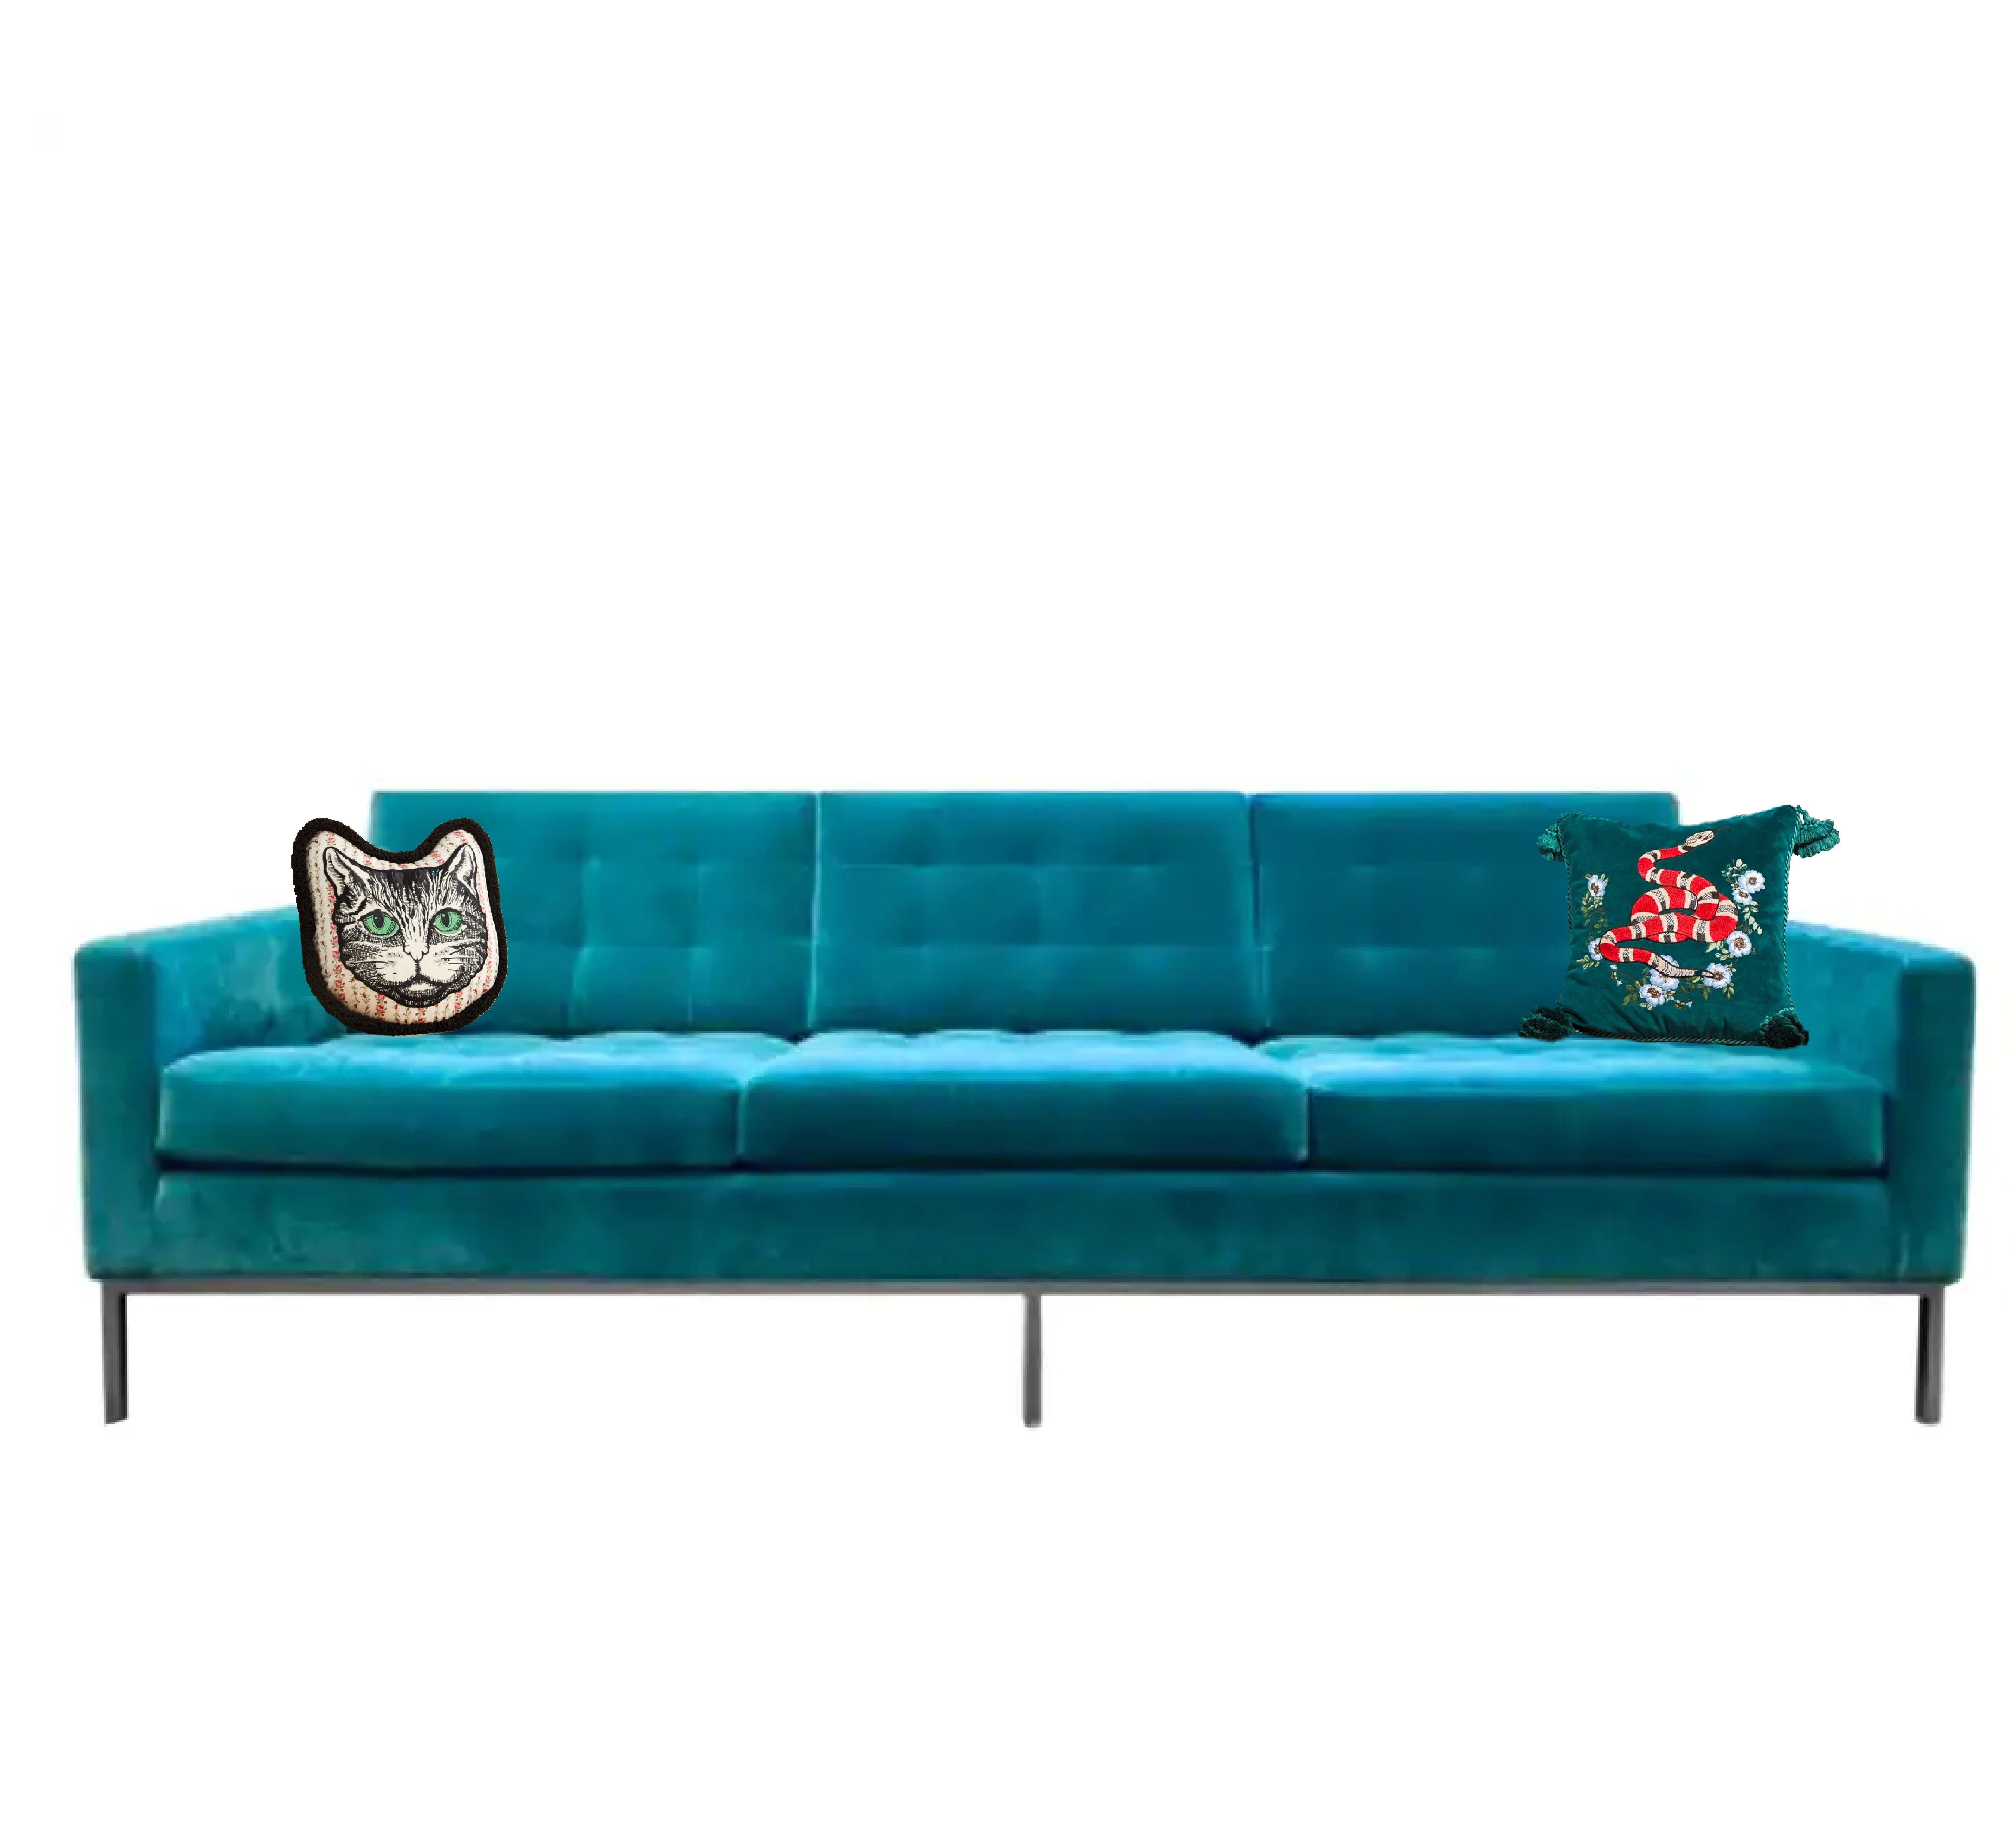 Florence Knoll sofa, teal blue green velvet, Knoll International, New York, designed in 1954. Timeless Mid-Century Modern design, effortlessly neat and minimal while maintaining affable warmth and comfort. Substantial steel frame and hand-tufted